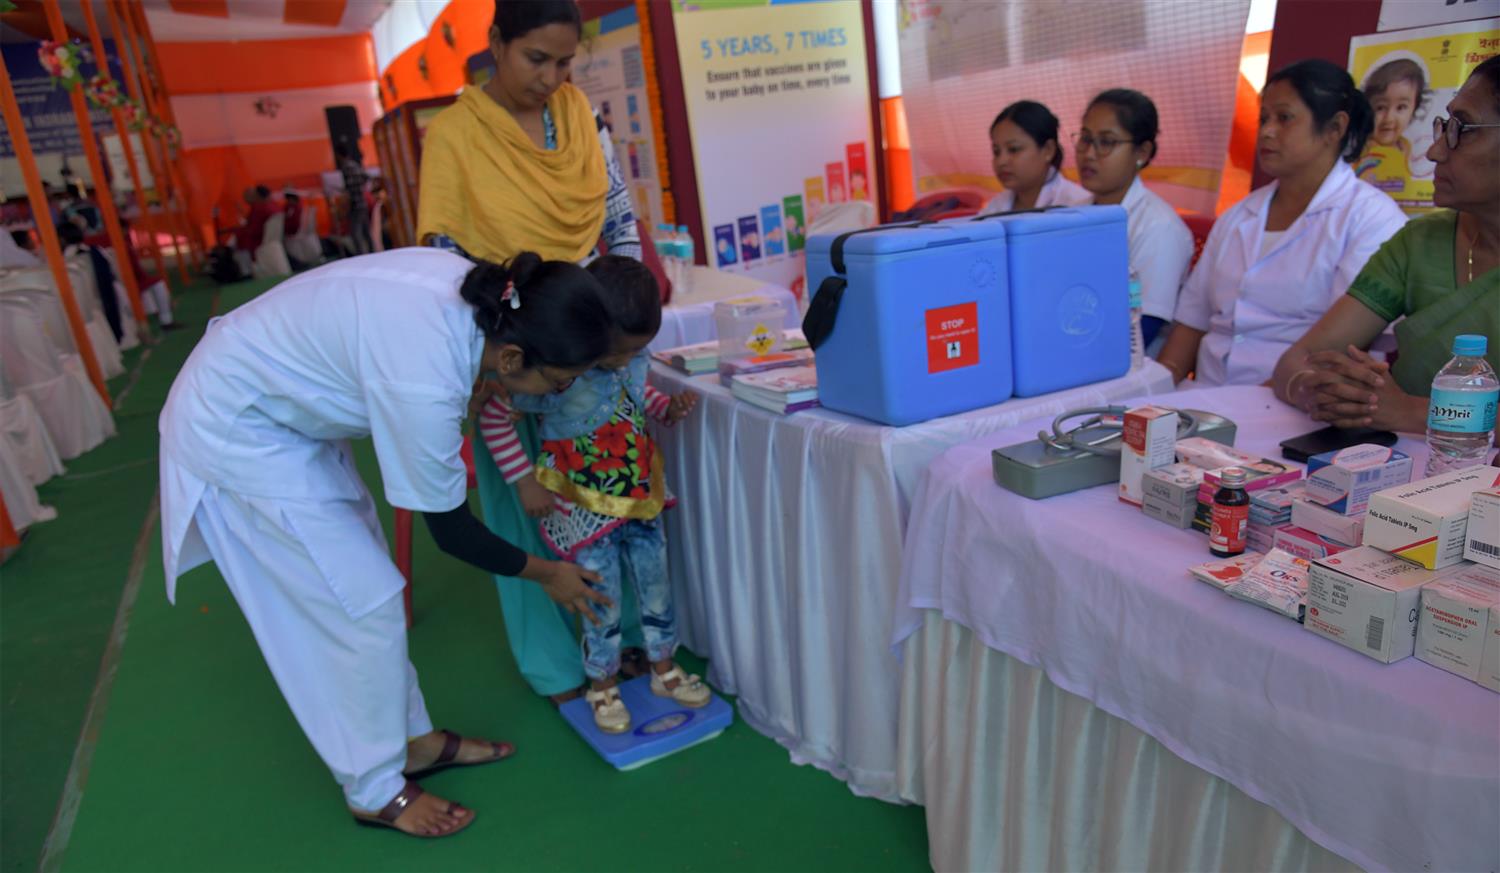 Regional Outreach Bureau, Guwahati under the Ministry of Information and Broadcasting organized an exhibition on Intensified Mission Indradhanush 2.0 at Neherubali Play Ground at Nagaon today. Free Health check up and Immunization camp was also organized at the event in coordination with the District Health Department of Nagaon on 29th February  2020.

